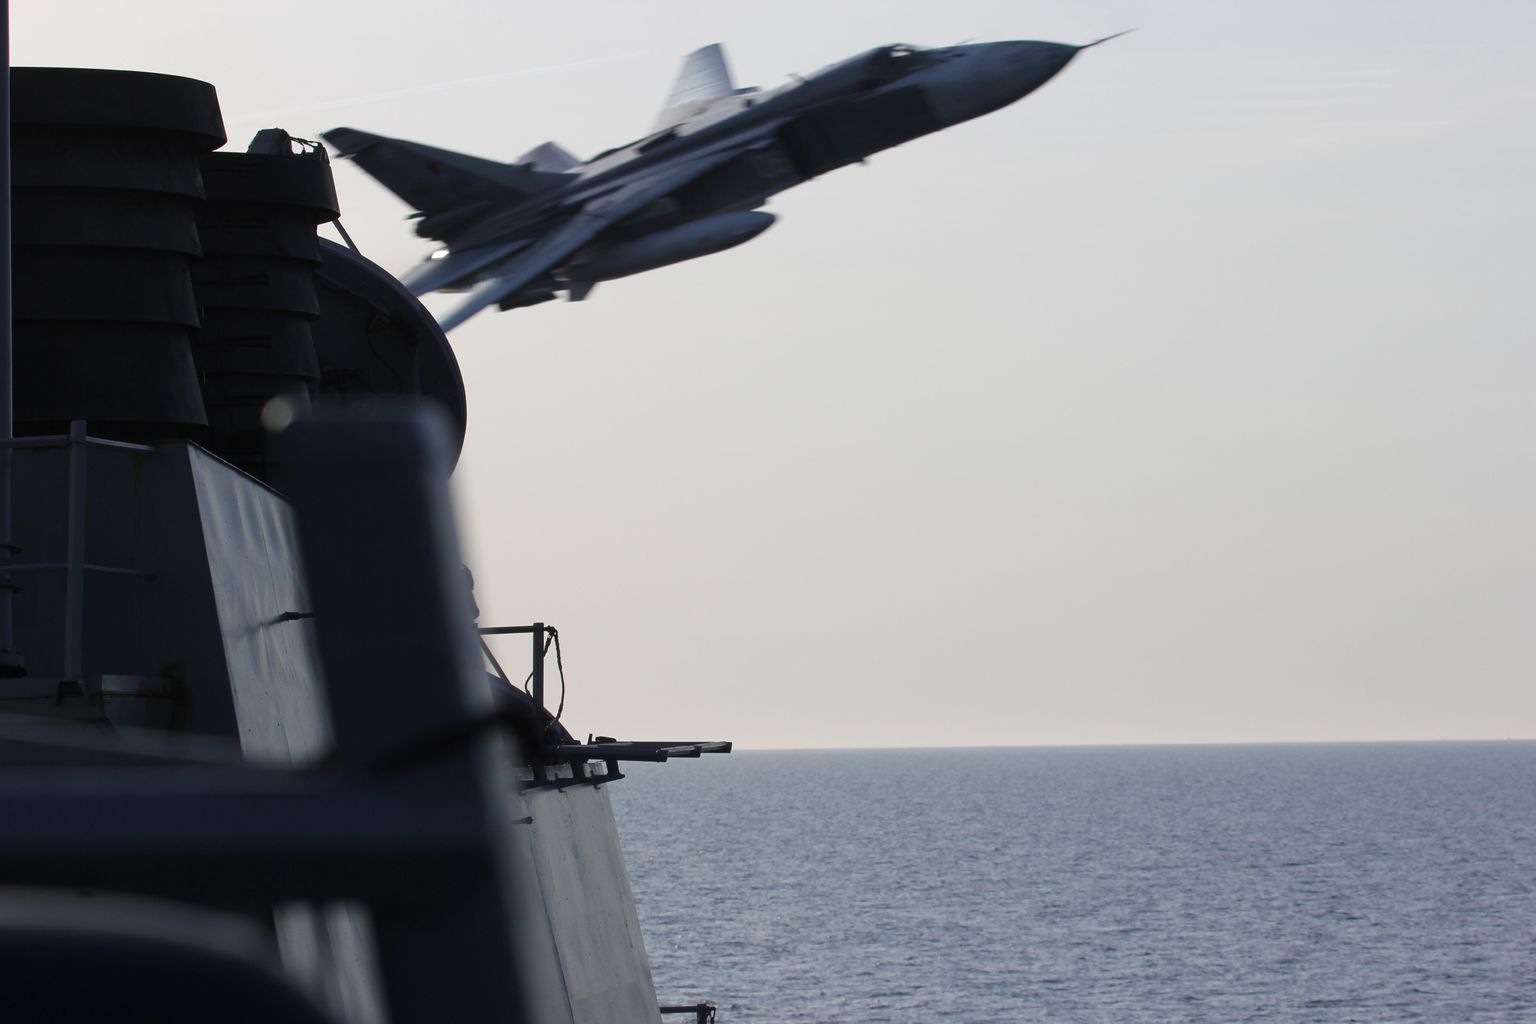 In this image released by the U.S. Navy, a Russian SU-24 jet makes a close-range and low altitude pass near the USS Donald Cook on Tuesday, April 12, 2016, in the Baltic Sea. The Russian attack planes buzzed the U.S. Navy destroyer multiple times on Monday and Tuesday, at one point coming so close, an estimated 30 feet, that they created wakes in the water around the ship, a U.S. official said Wednesday, April 13. (U.S. Navy via AP)